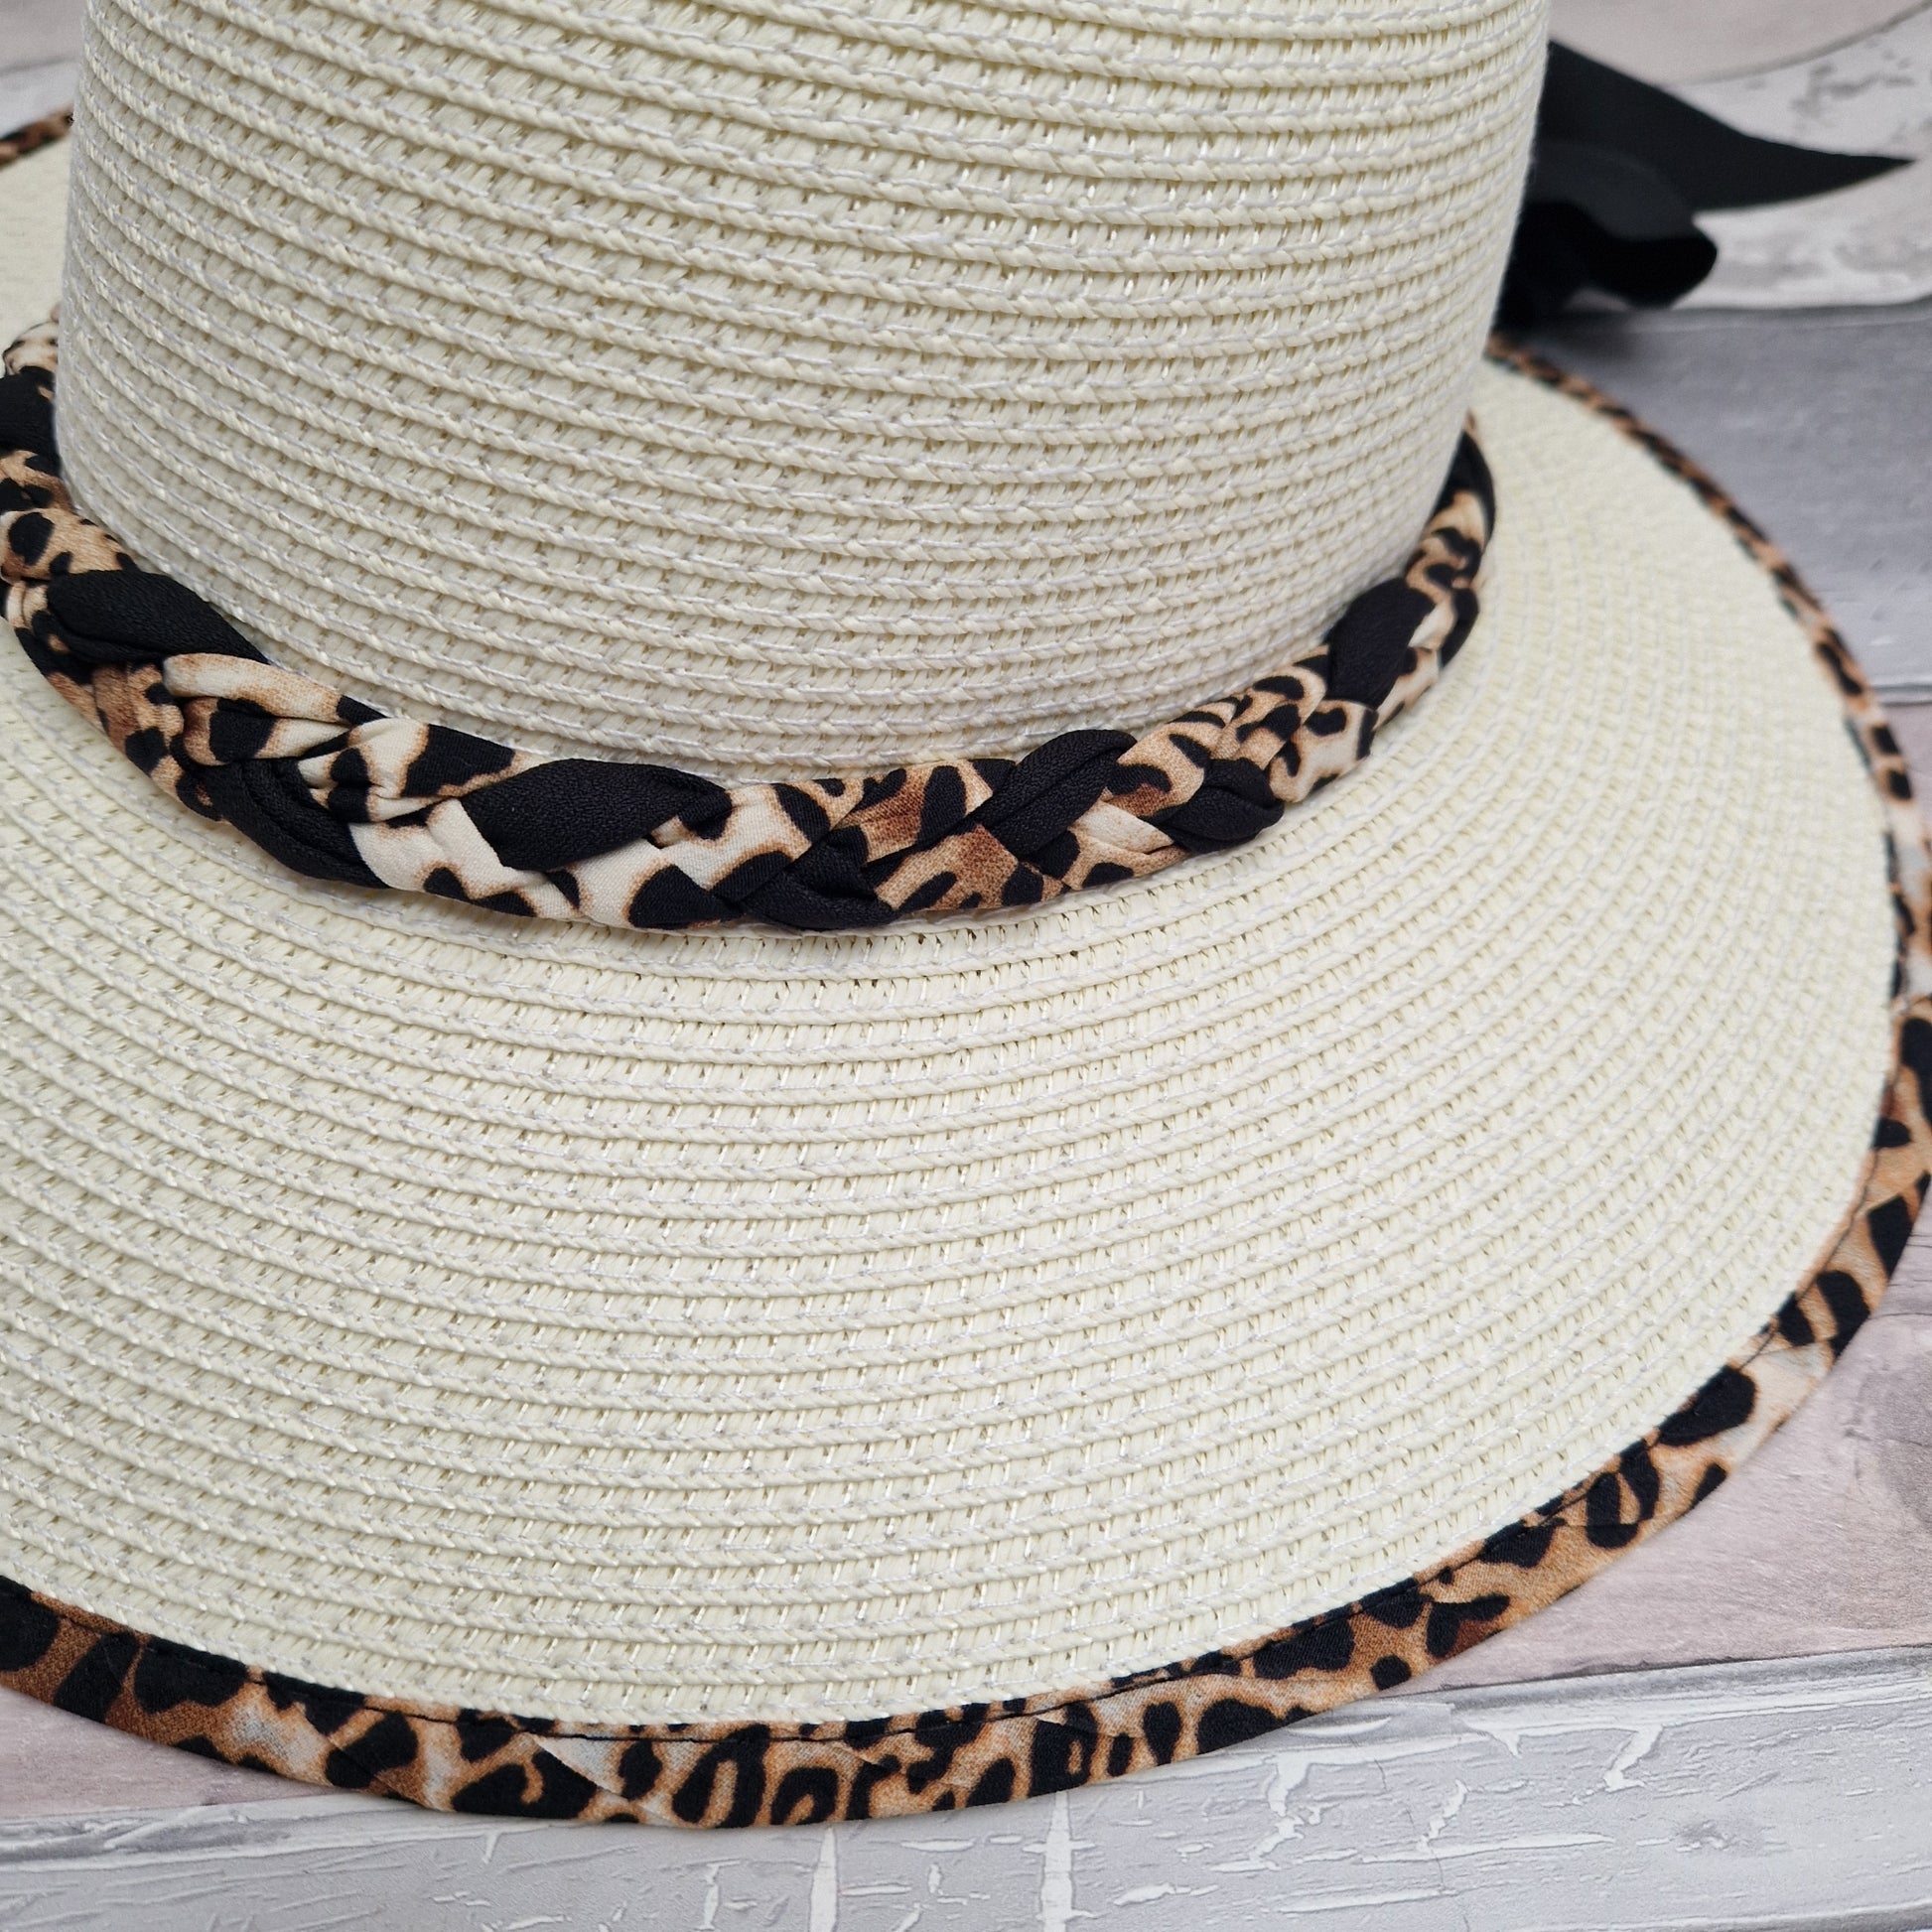 Cream open backed hat with an animal print trim and black bow.